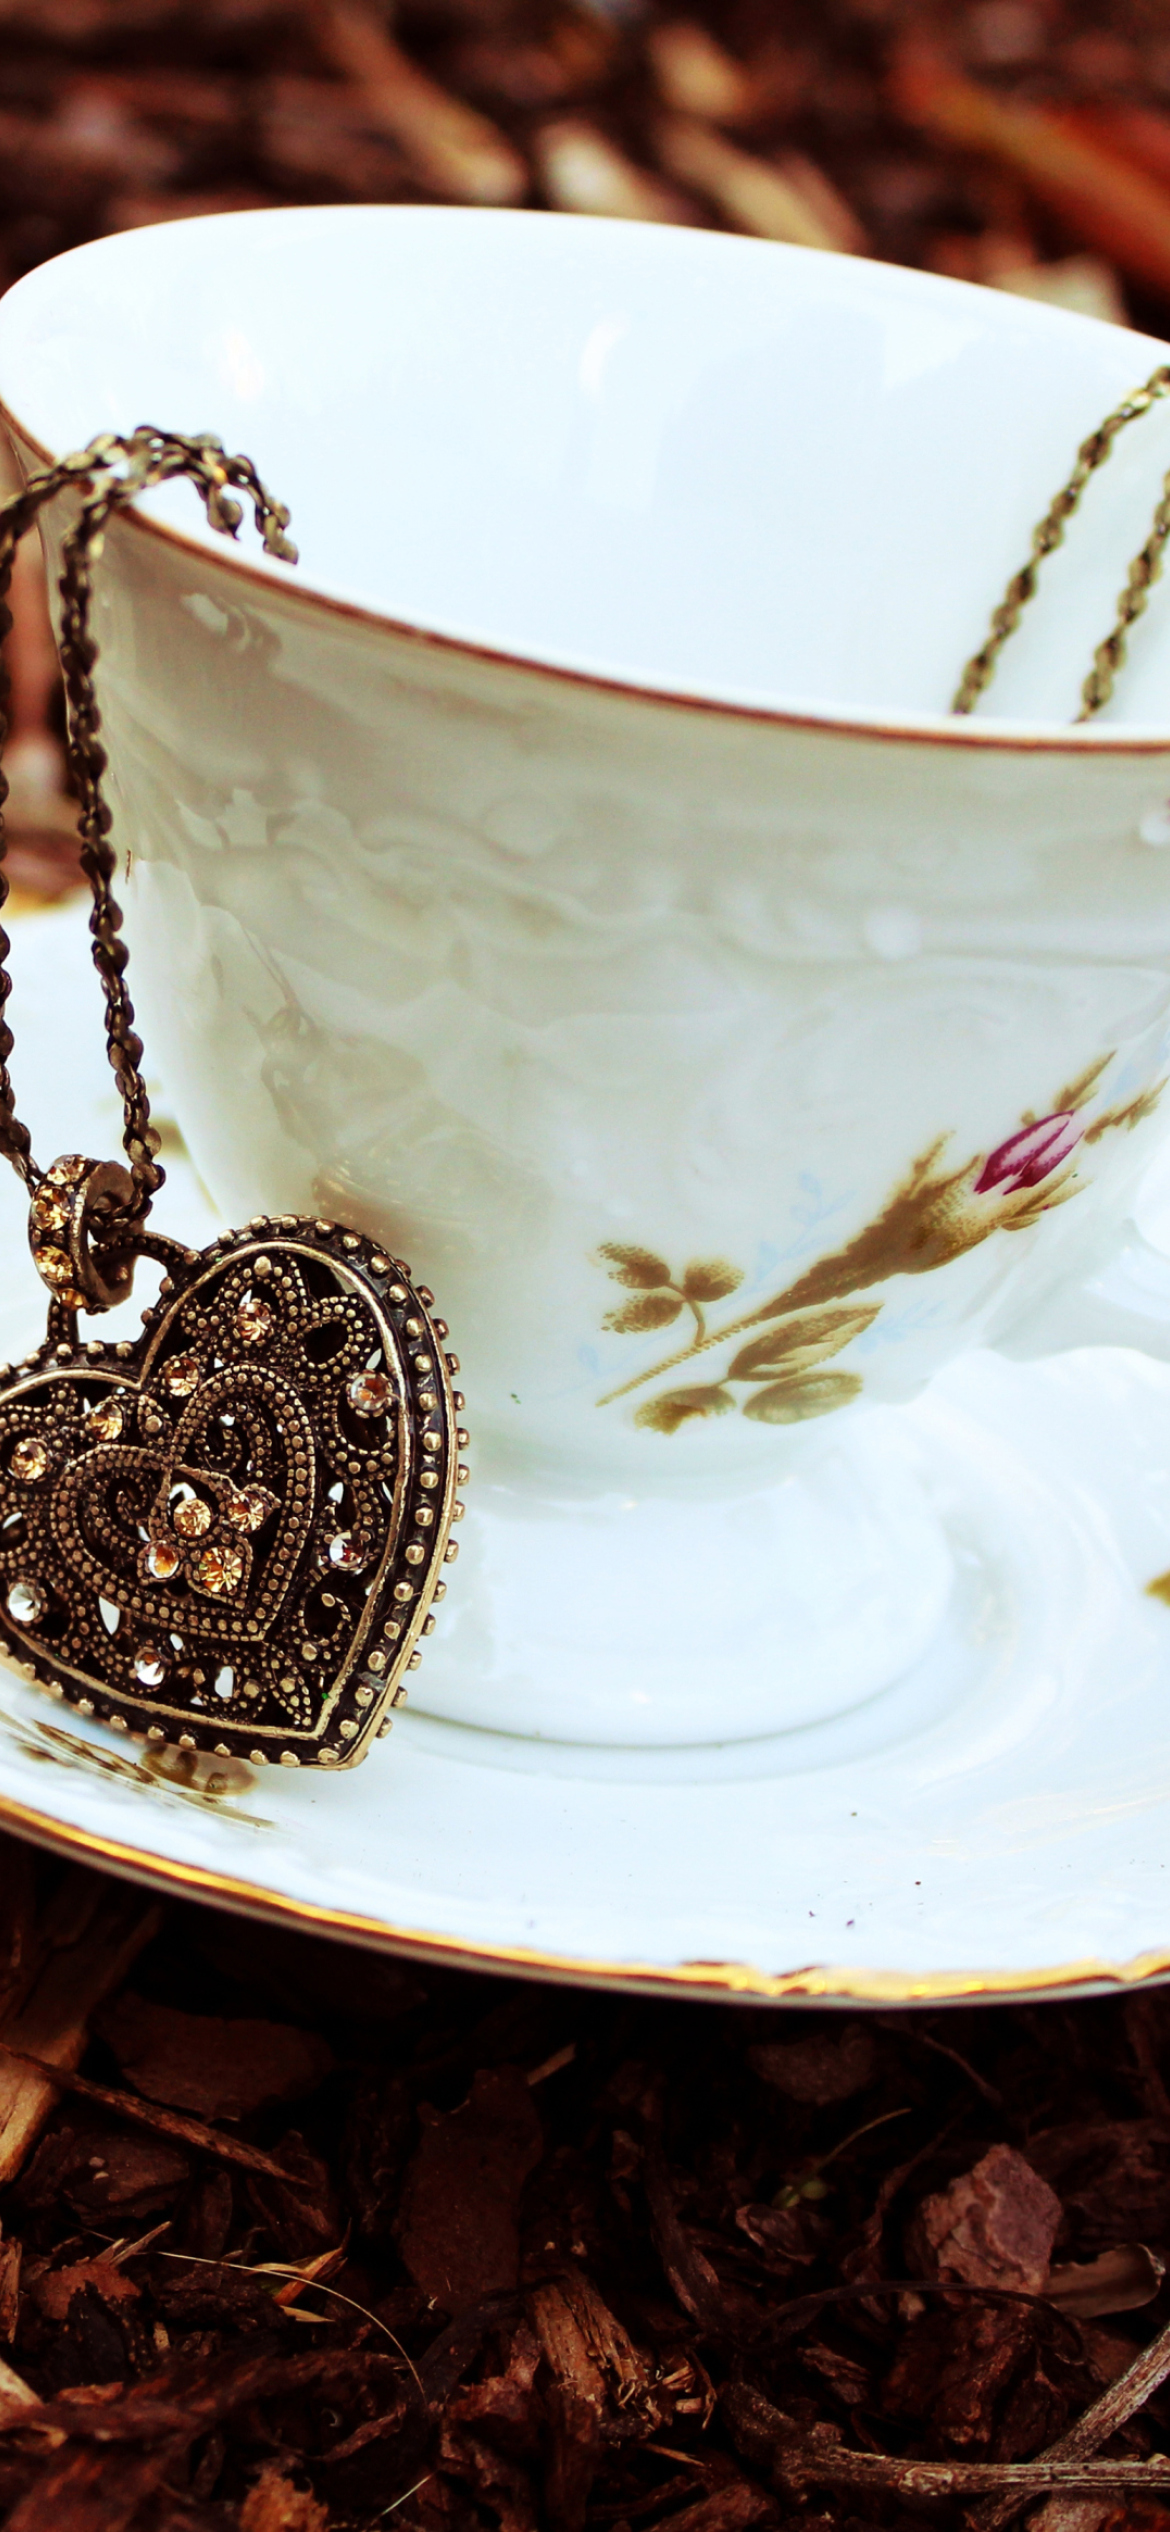 Heart Pendant And Vintage Cup wallpaper 1170x2532